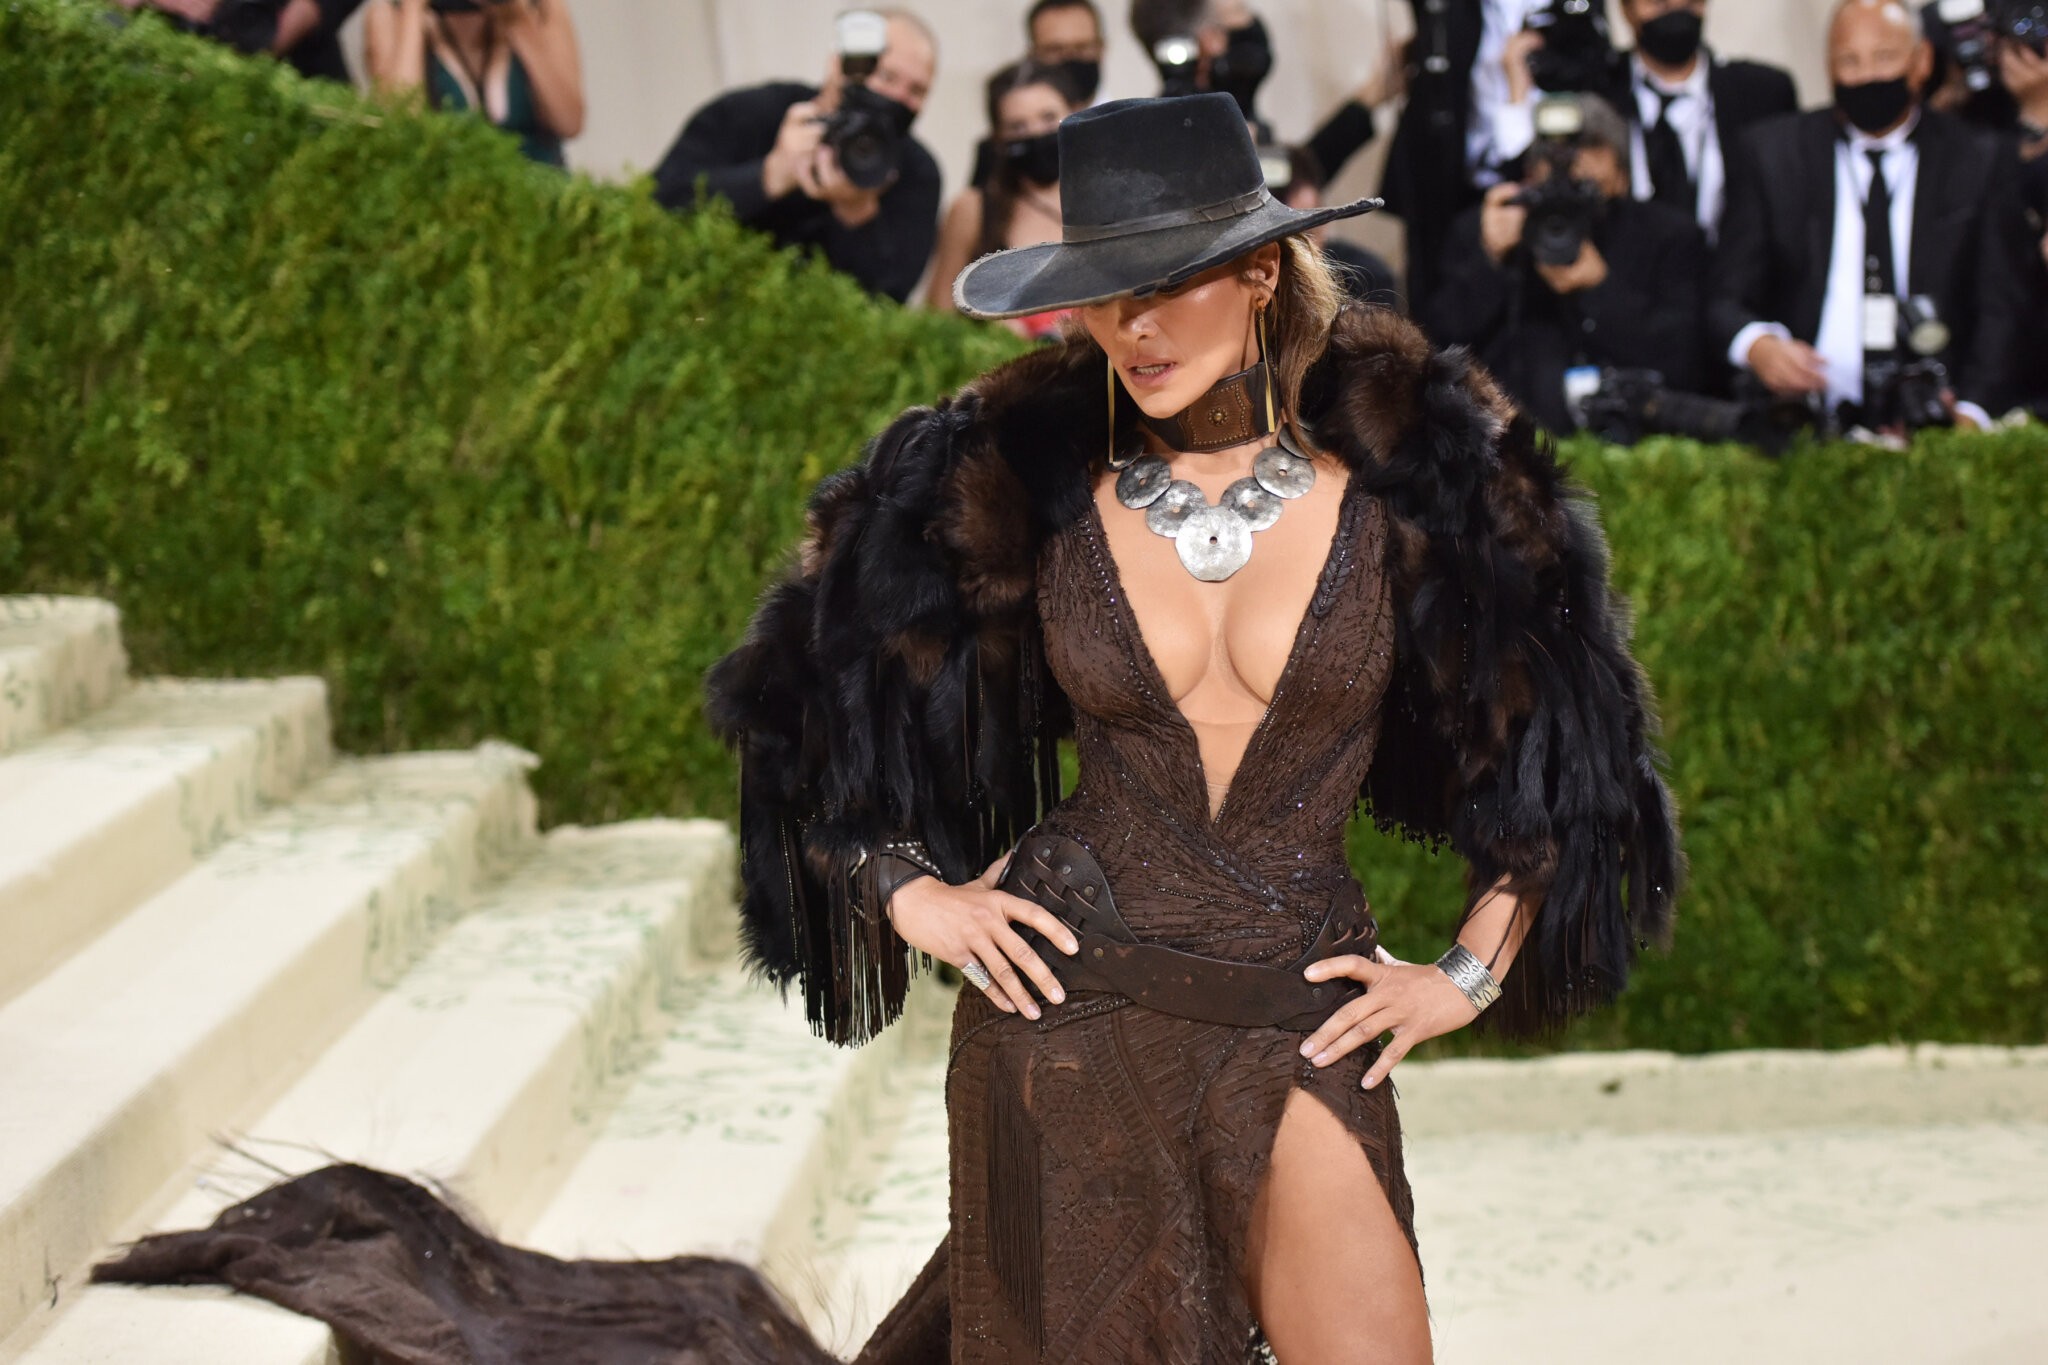 Jennifer Lopez wears Ralph Lauren for "America: A Lexicon Of Fashion" at the 2021 Met Gala